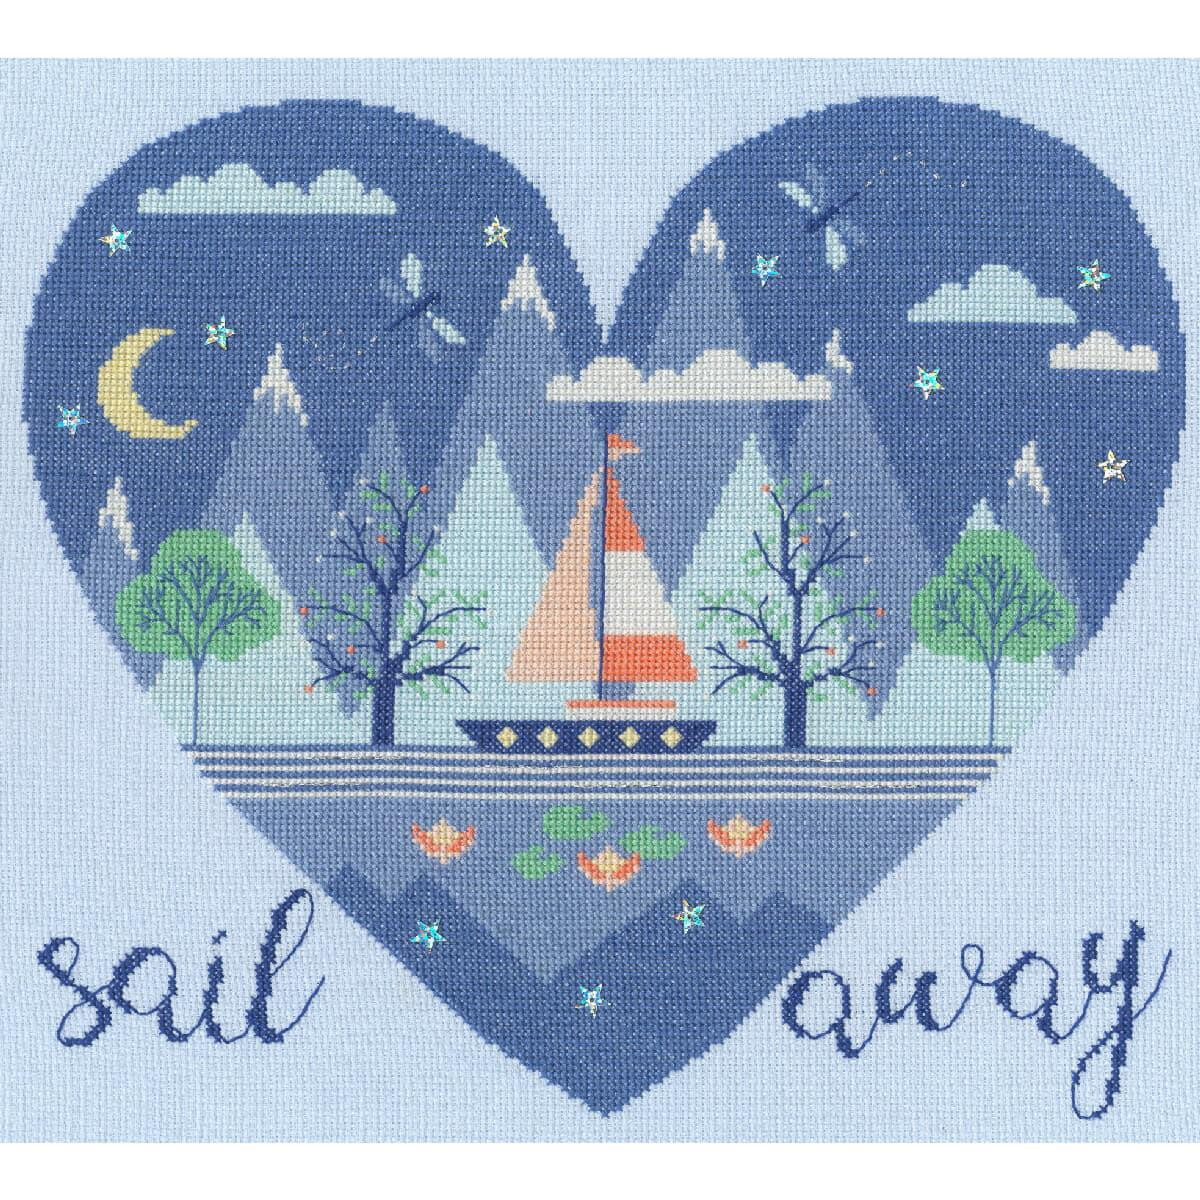 An embroidery pack from Bothy Threads shows a nautical...